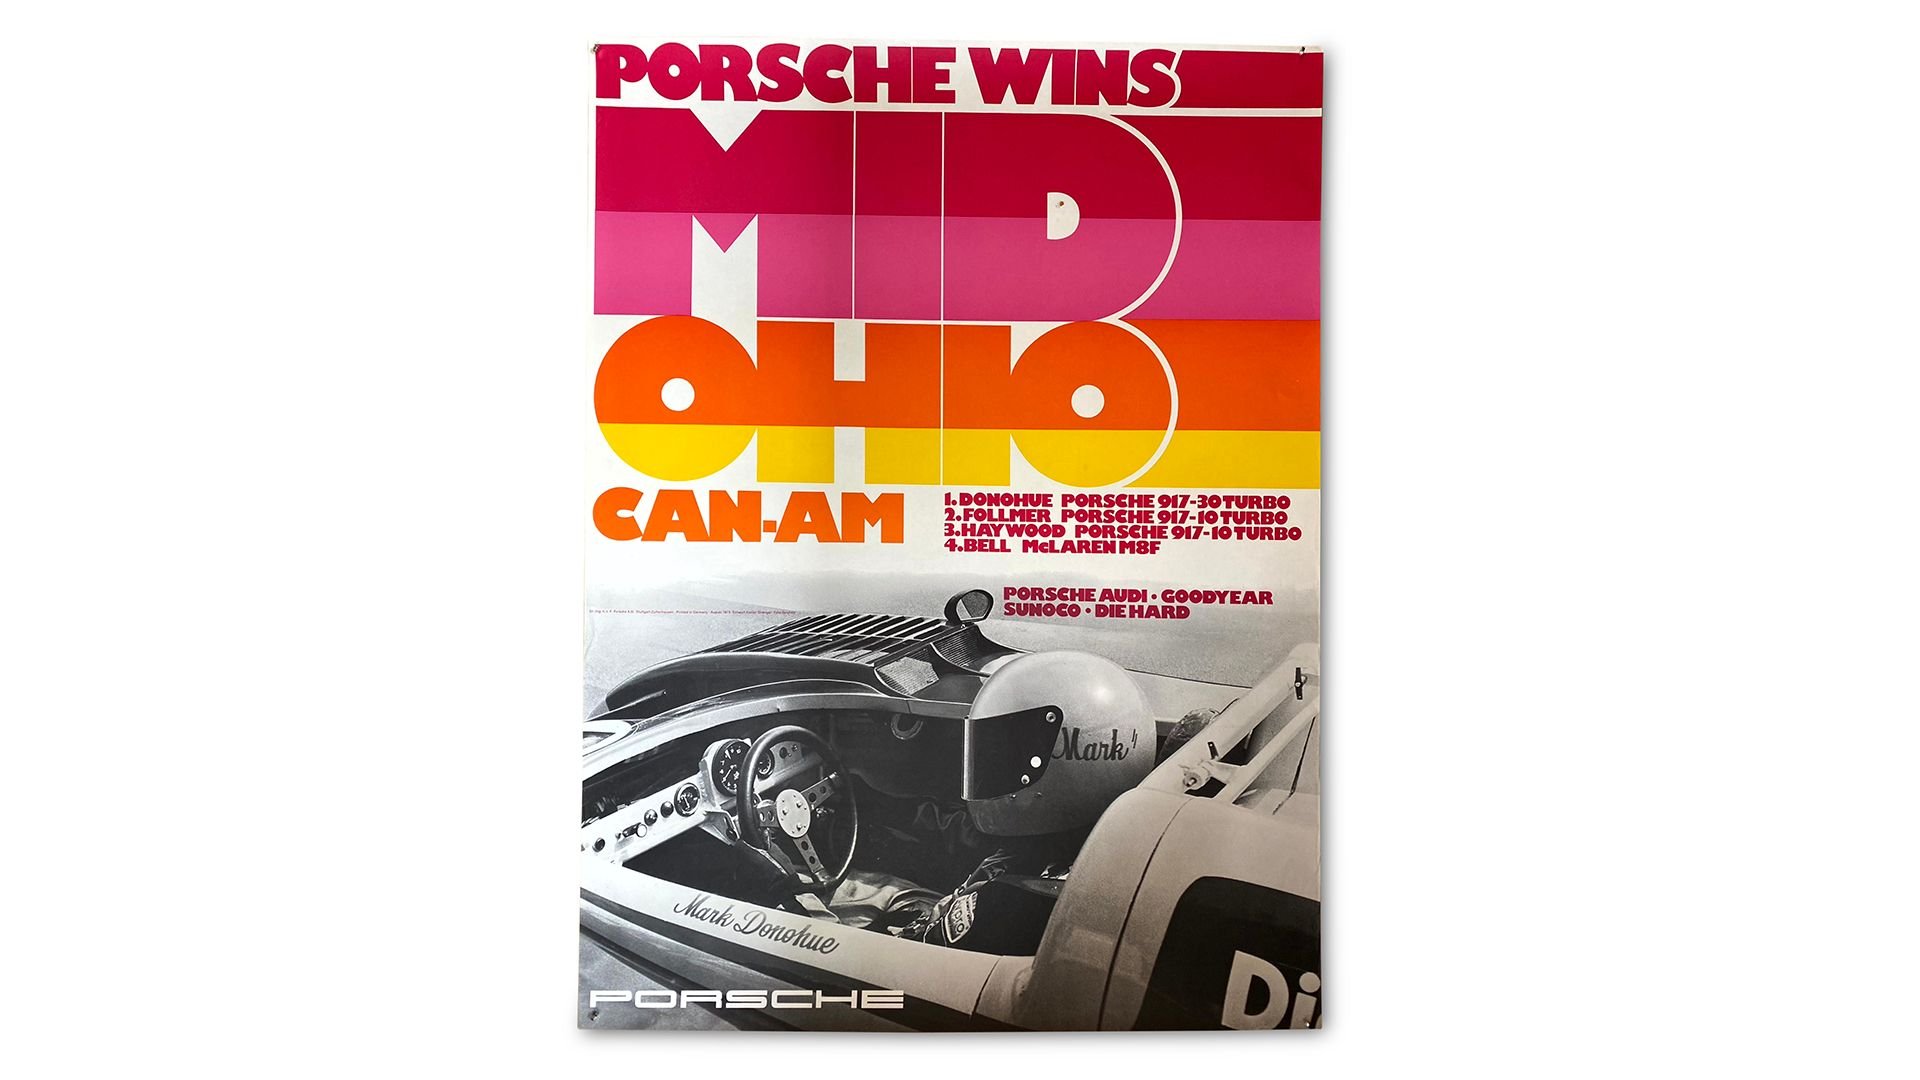 Group of 13 porsche can am 917 10 and 917 30 factory racing posters 1972 1973